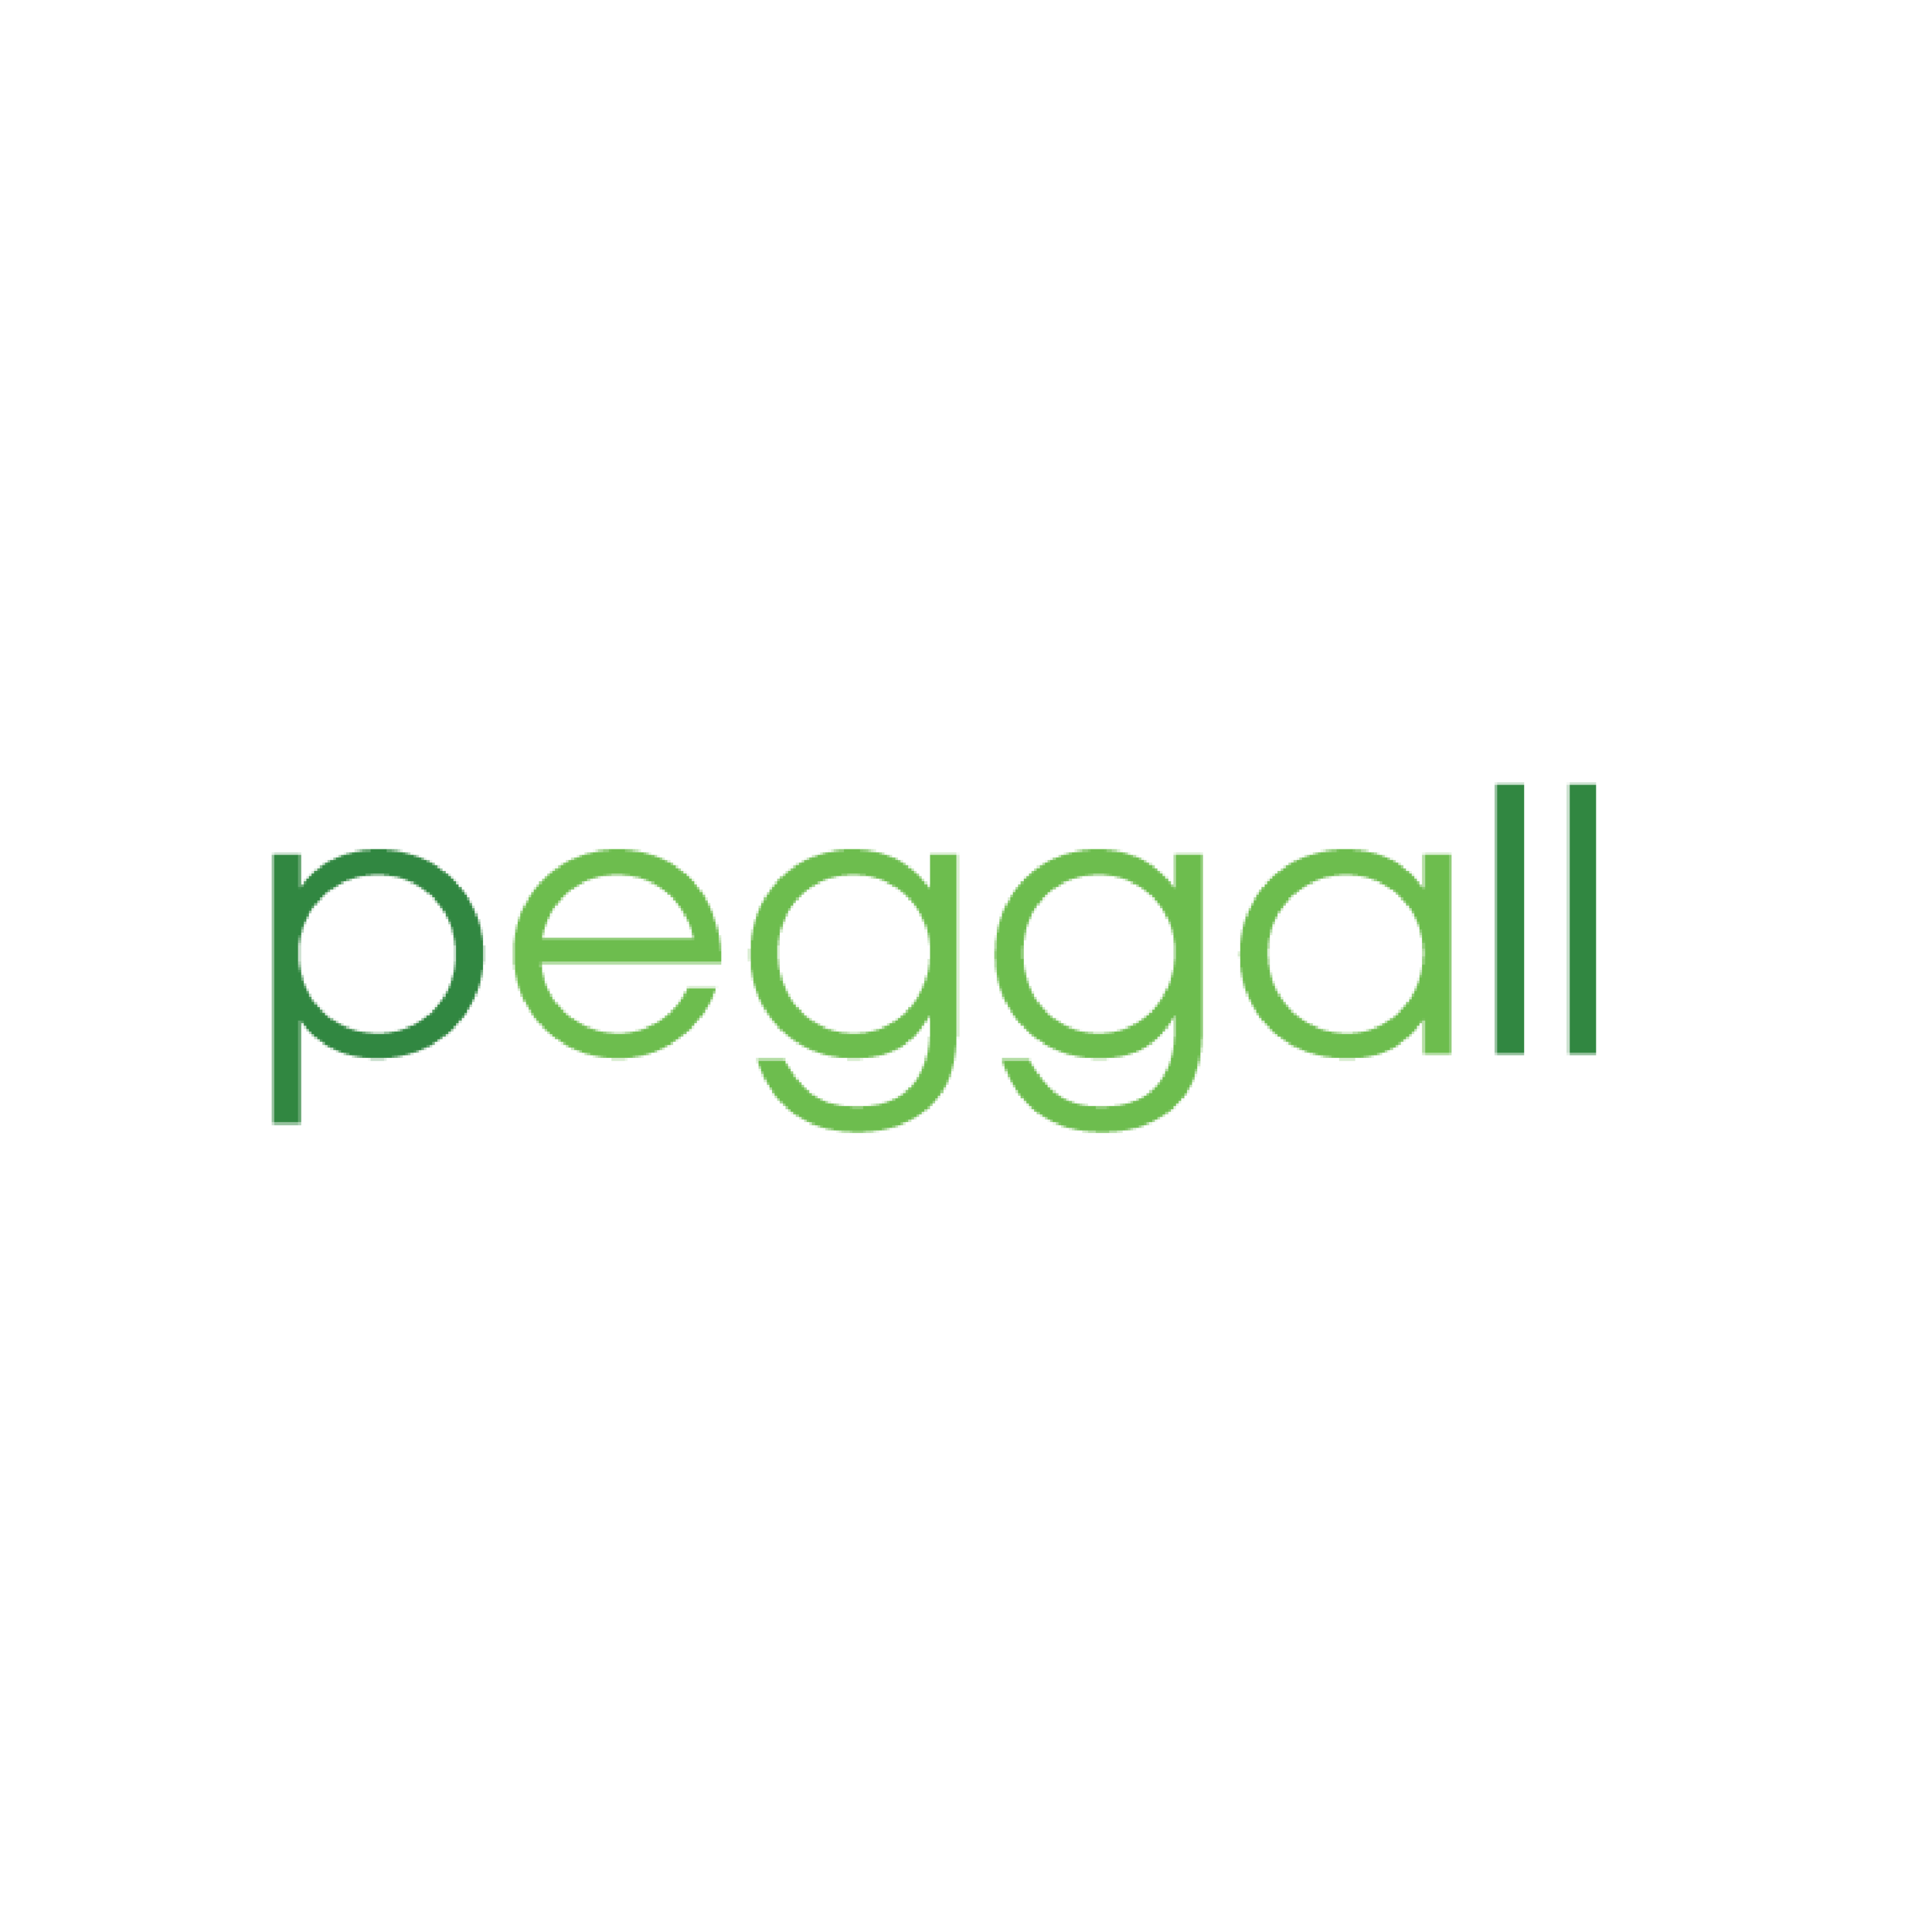 pegall-logo-new-03.png